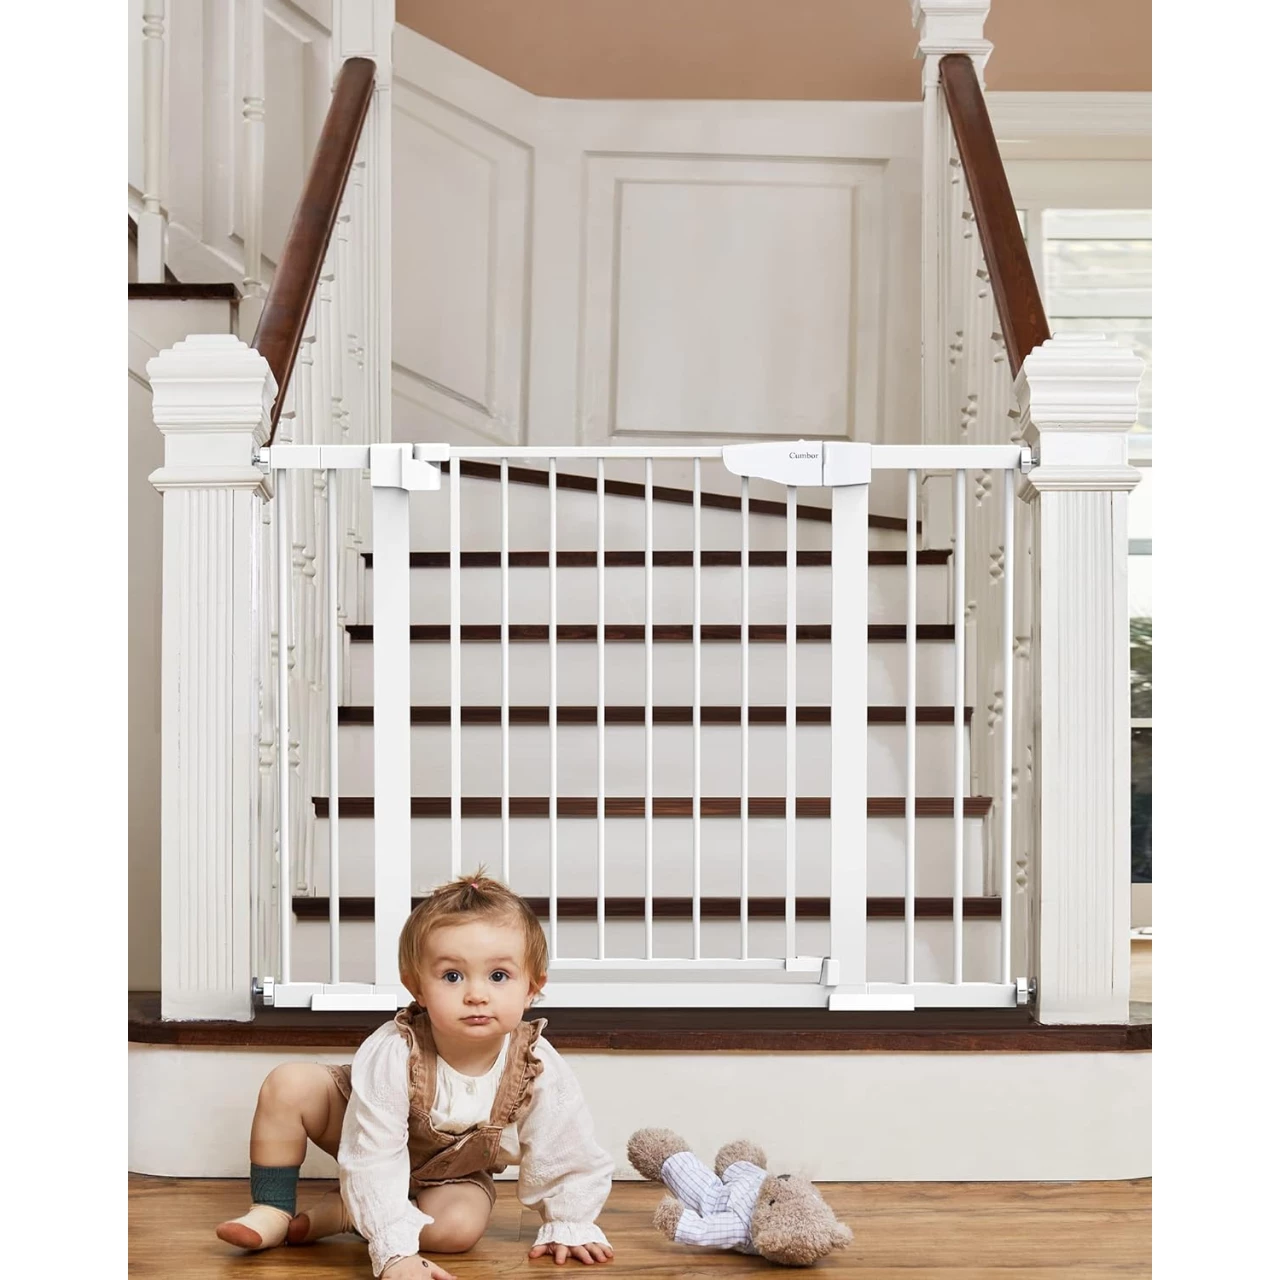 Mom&rsquo;s Choice Awards Winner-Cumbor 29.7-46&quot; Auto Close Baby Gate for Stairs, Easy Install Pressure/Hardware Mounted Dog Gates for The House Indoor, Easy Walk Thru Wide Safety Pet Gates for Dogs, White